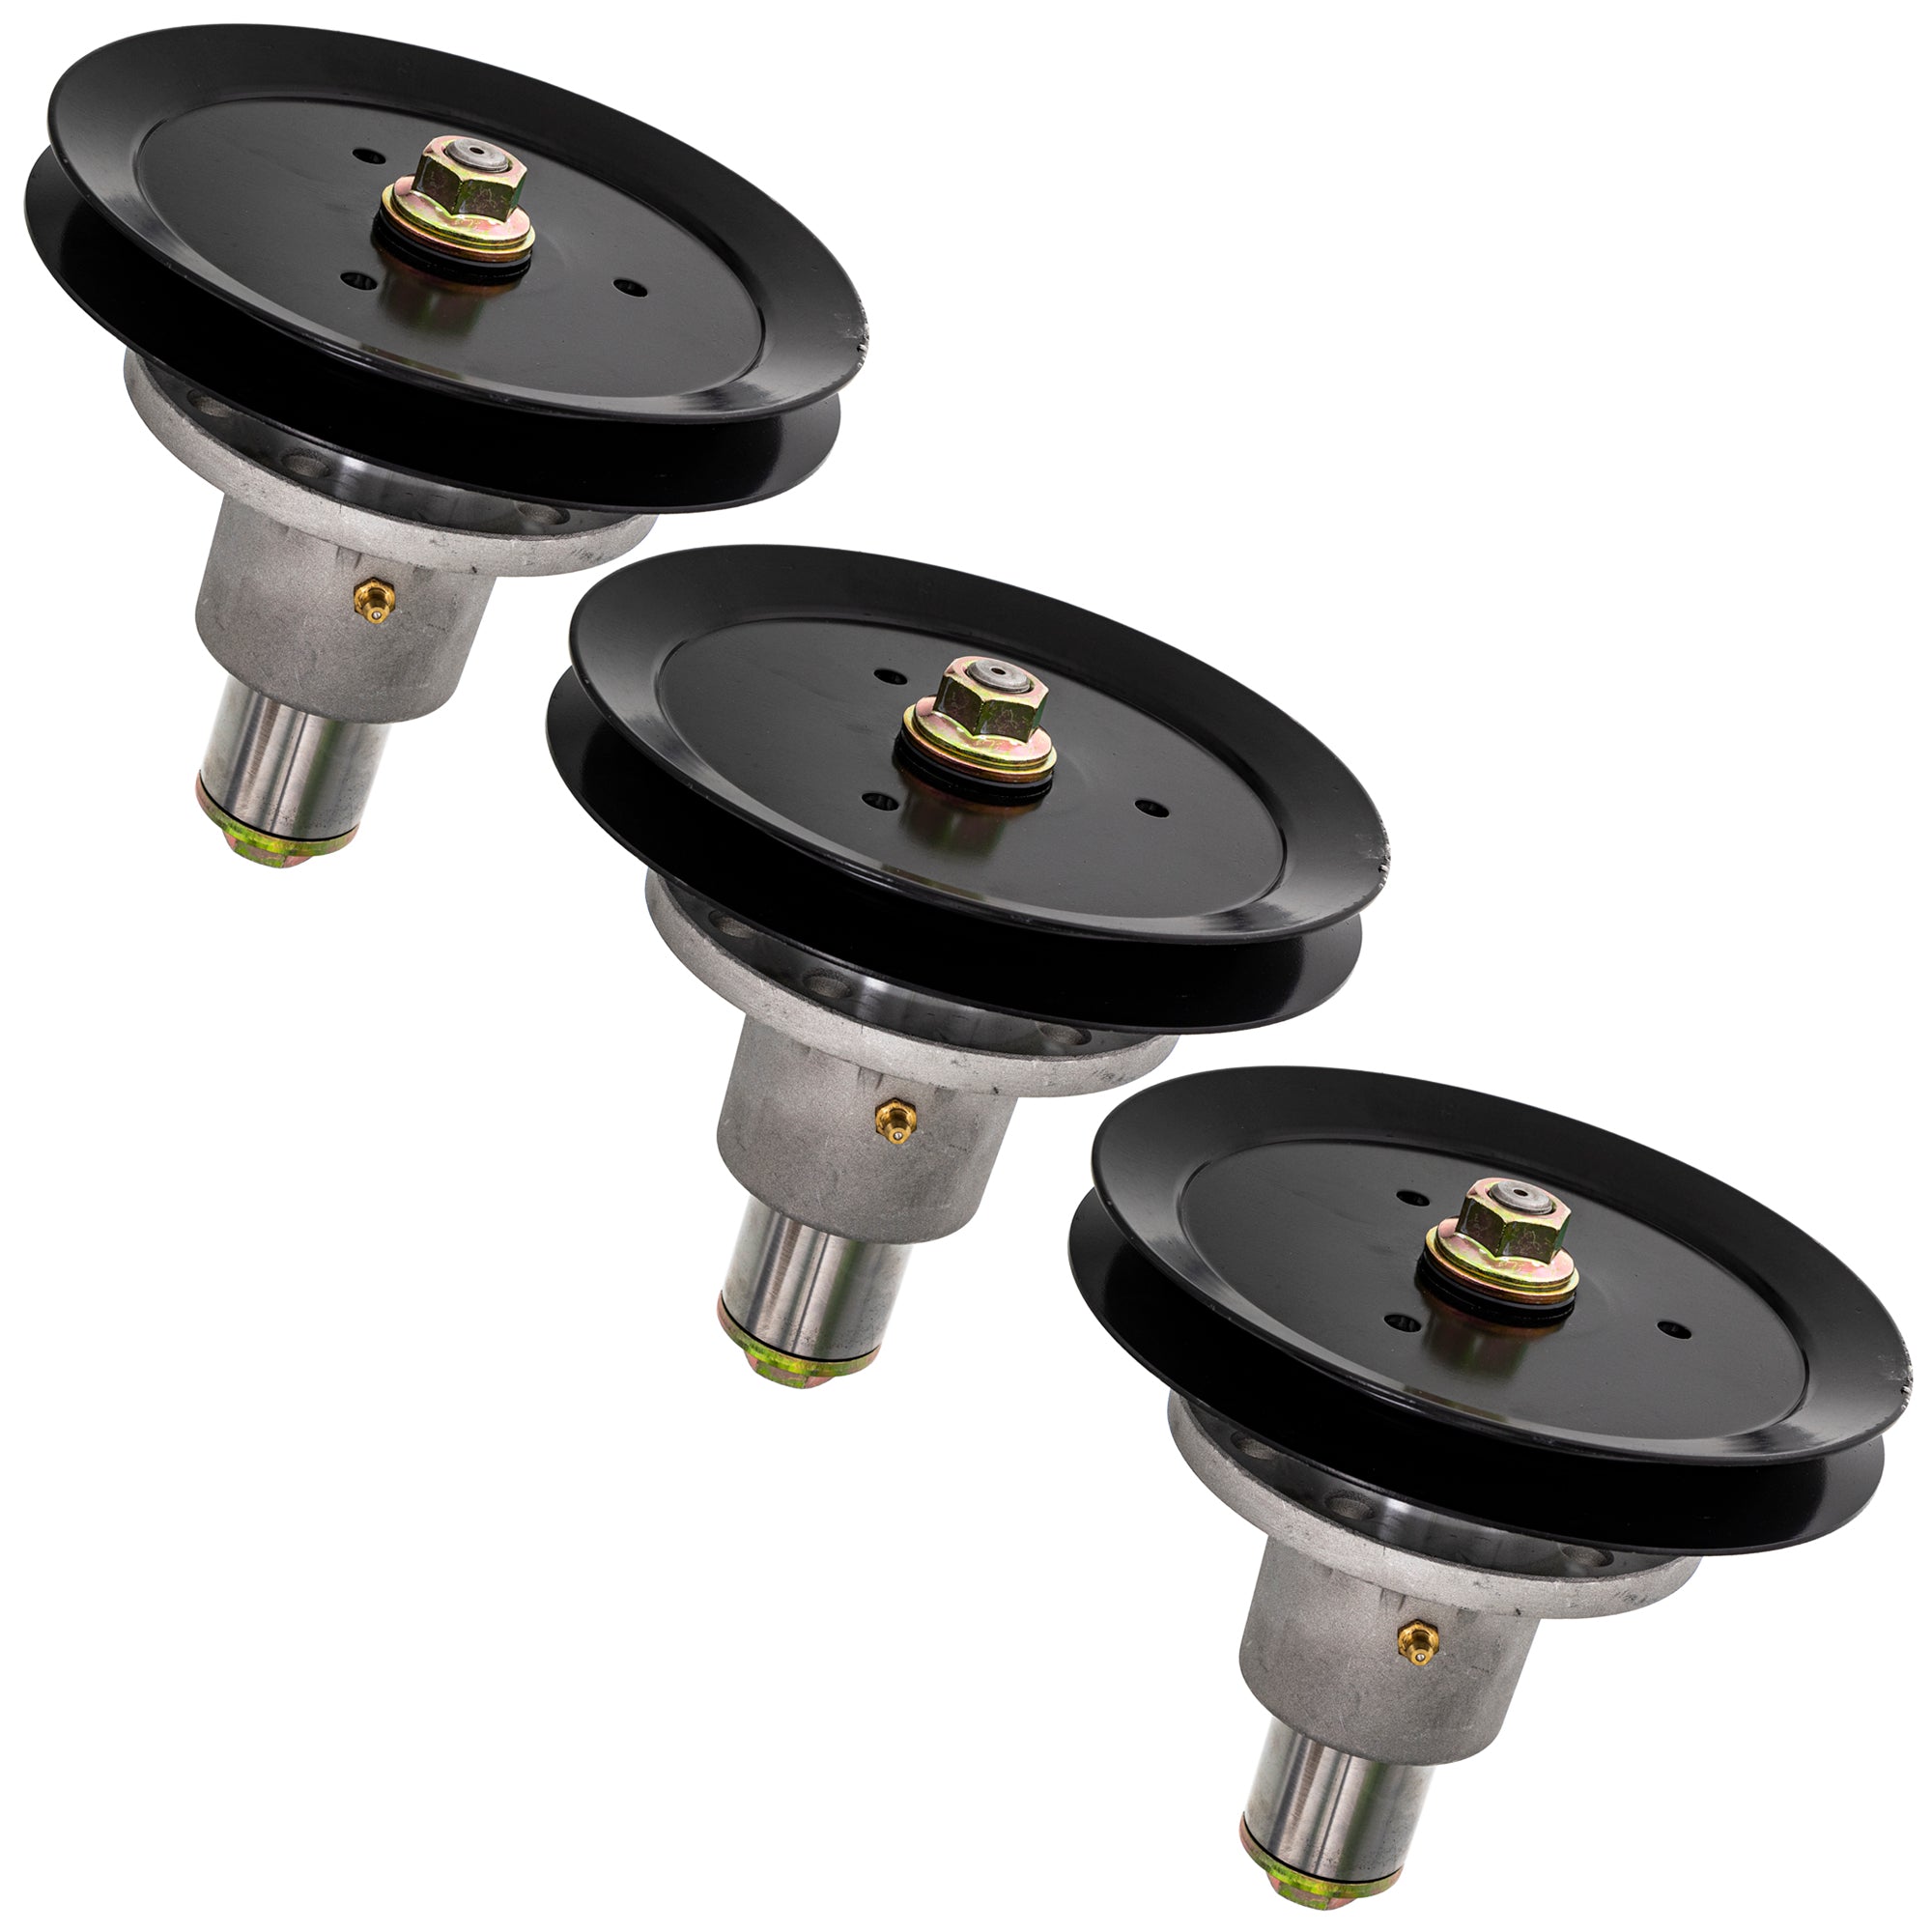 Deck Spindle with Pulley 3-Pack for zOTHER Toro Exmark Oregon Lazer 644092 1-644092 82-349 8TEN 810-CSP2298N